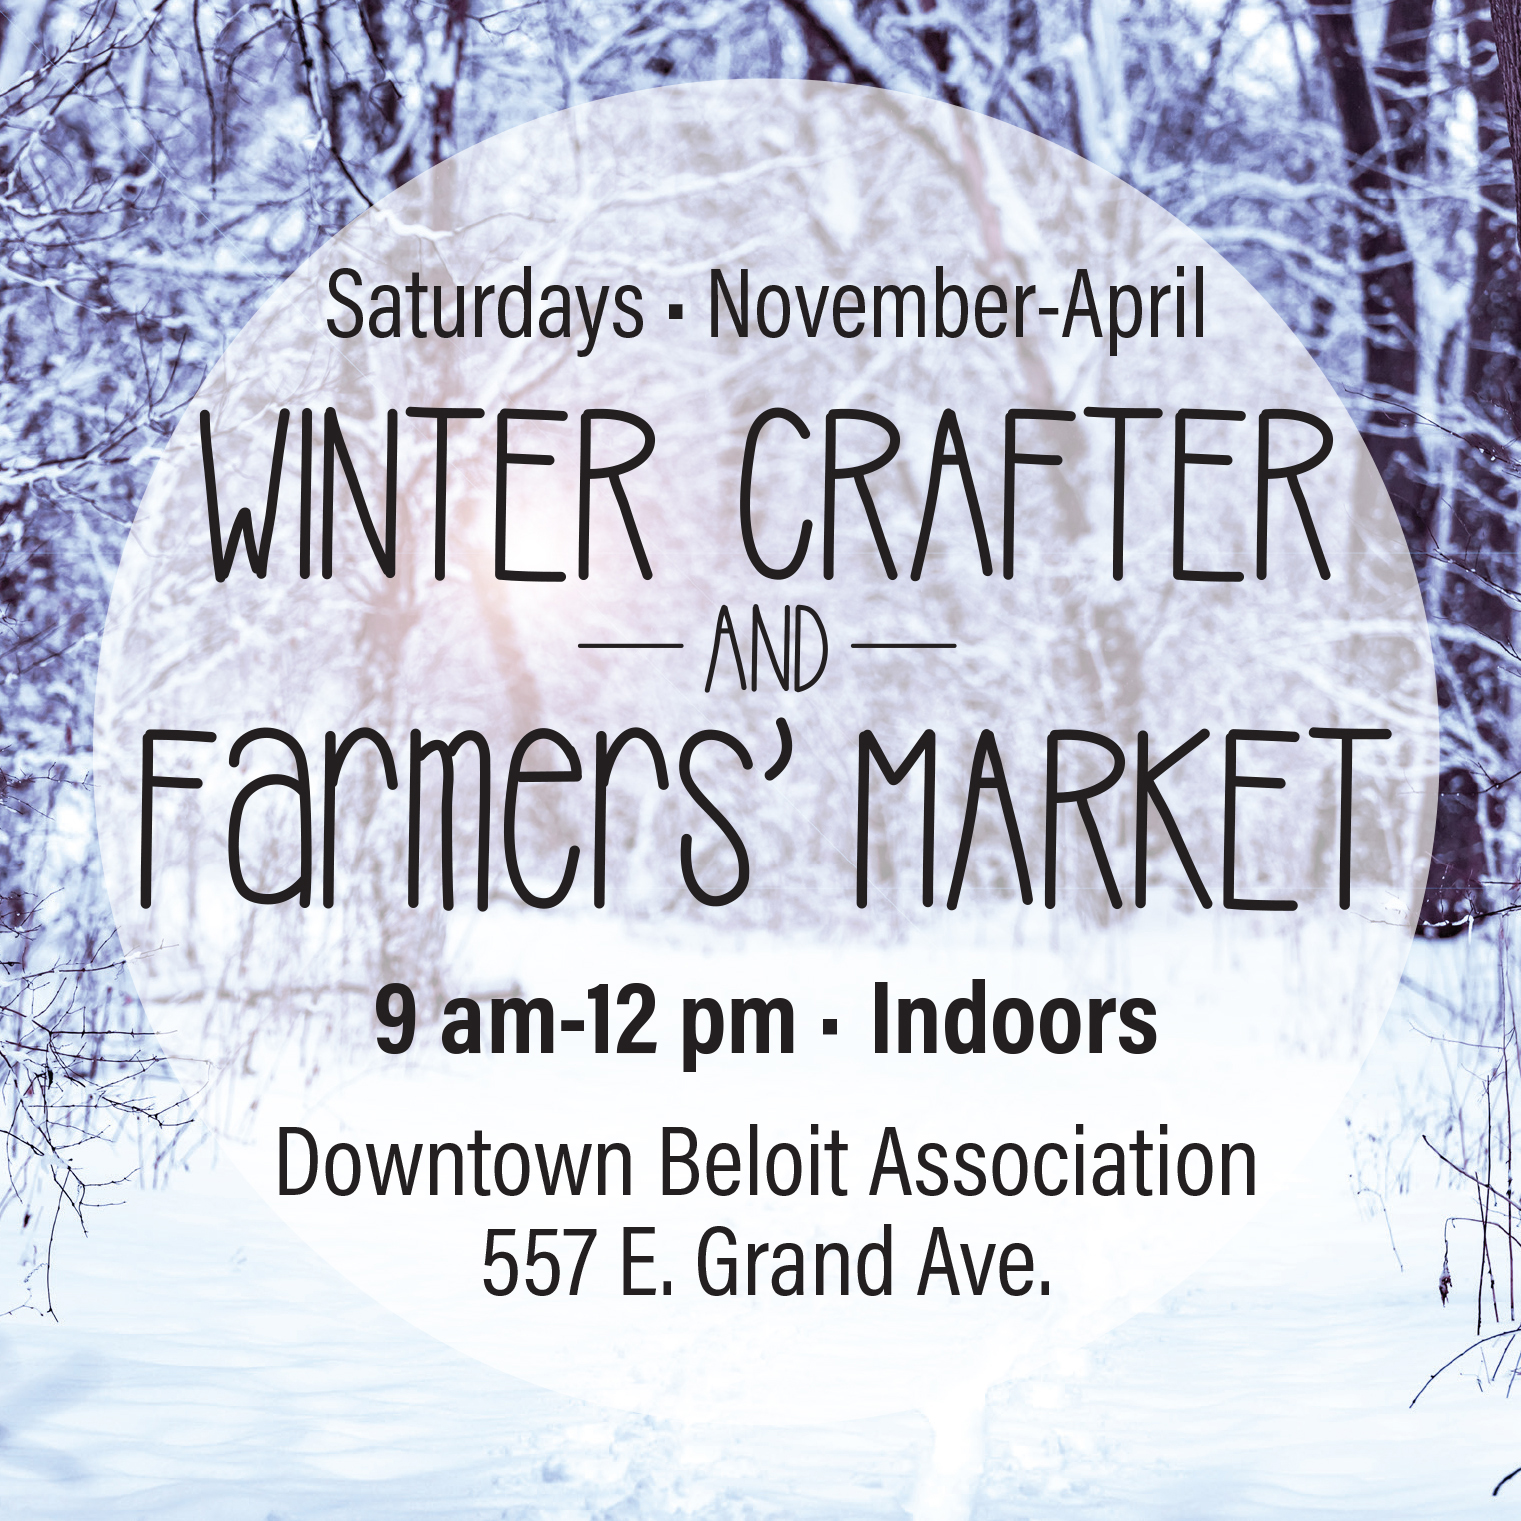 Winter Crafter and Farmers' Market